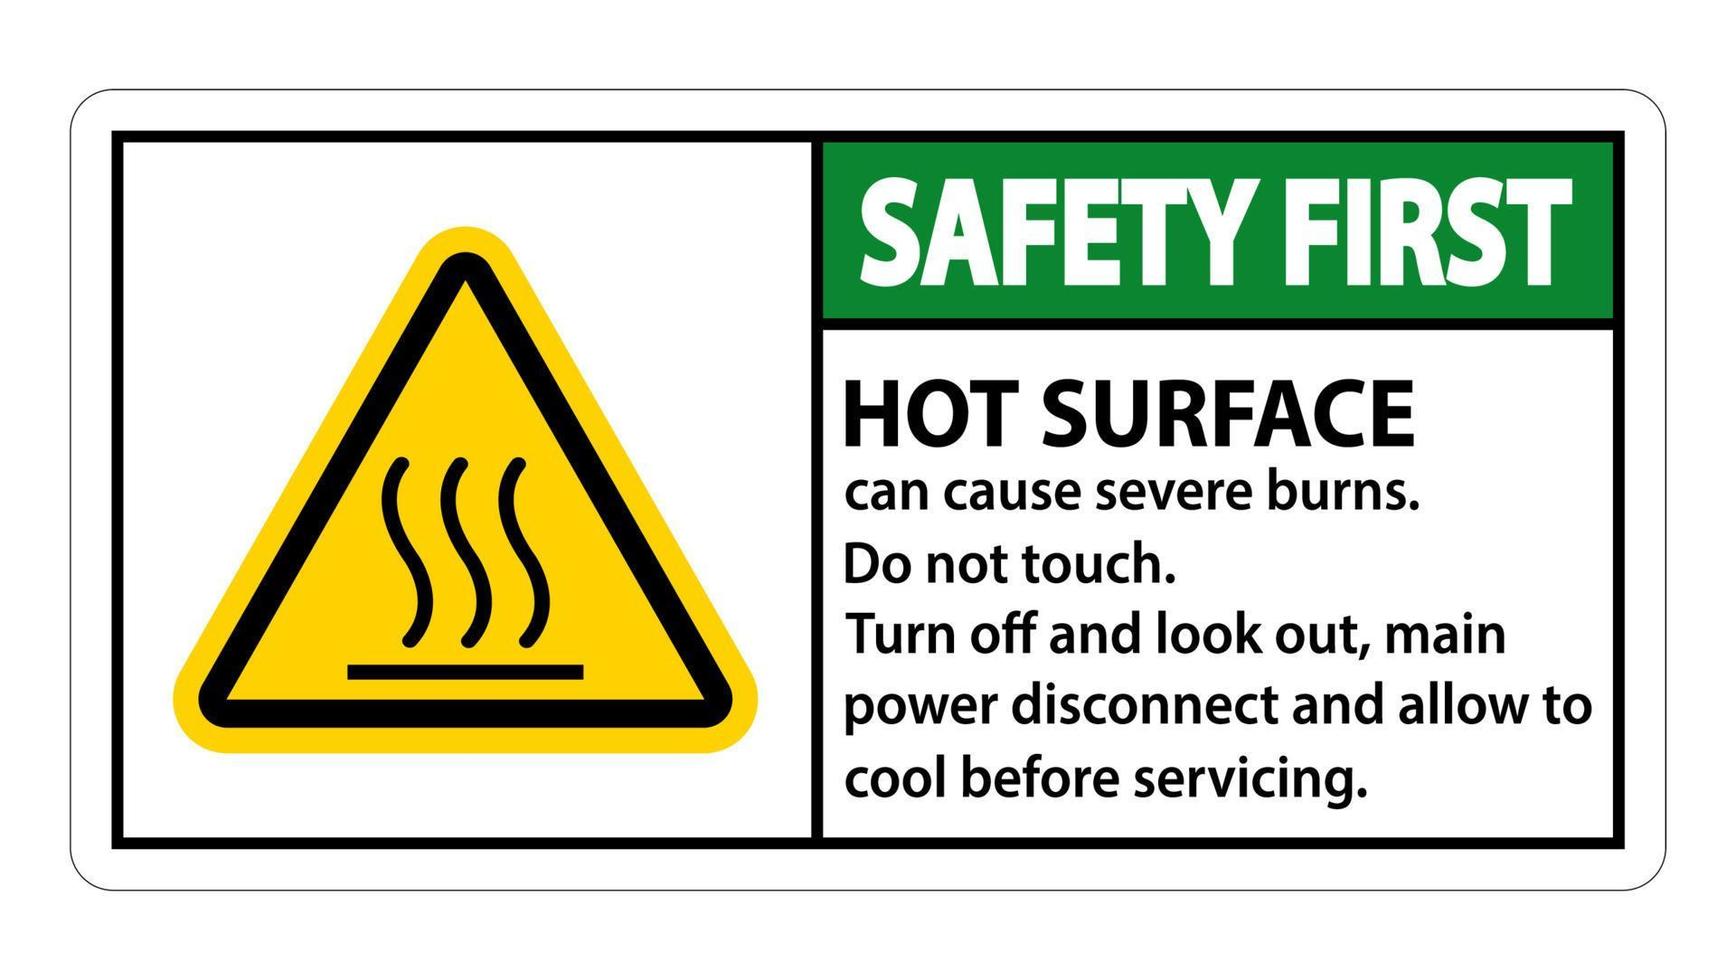 Safety First Hot surface sign on white background vector